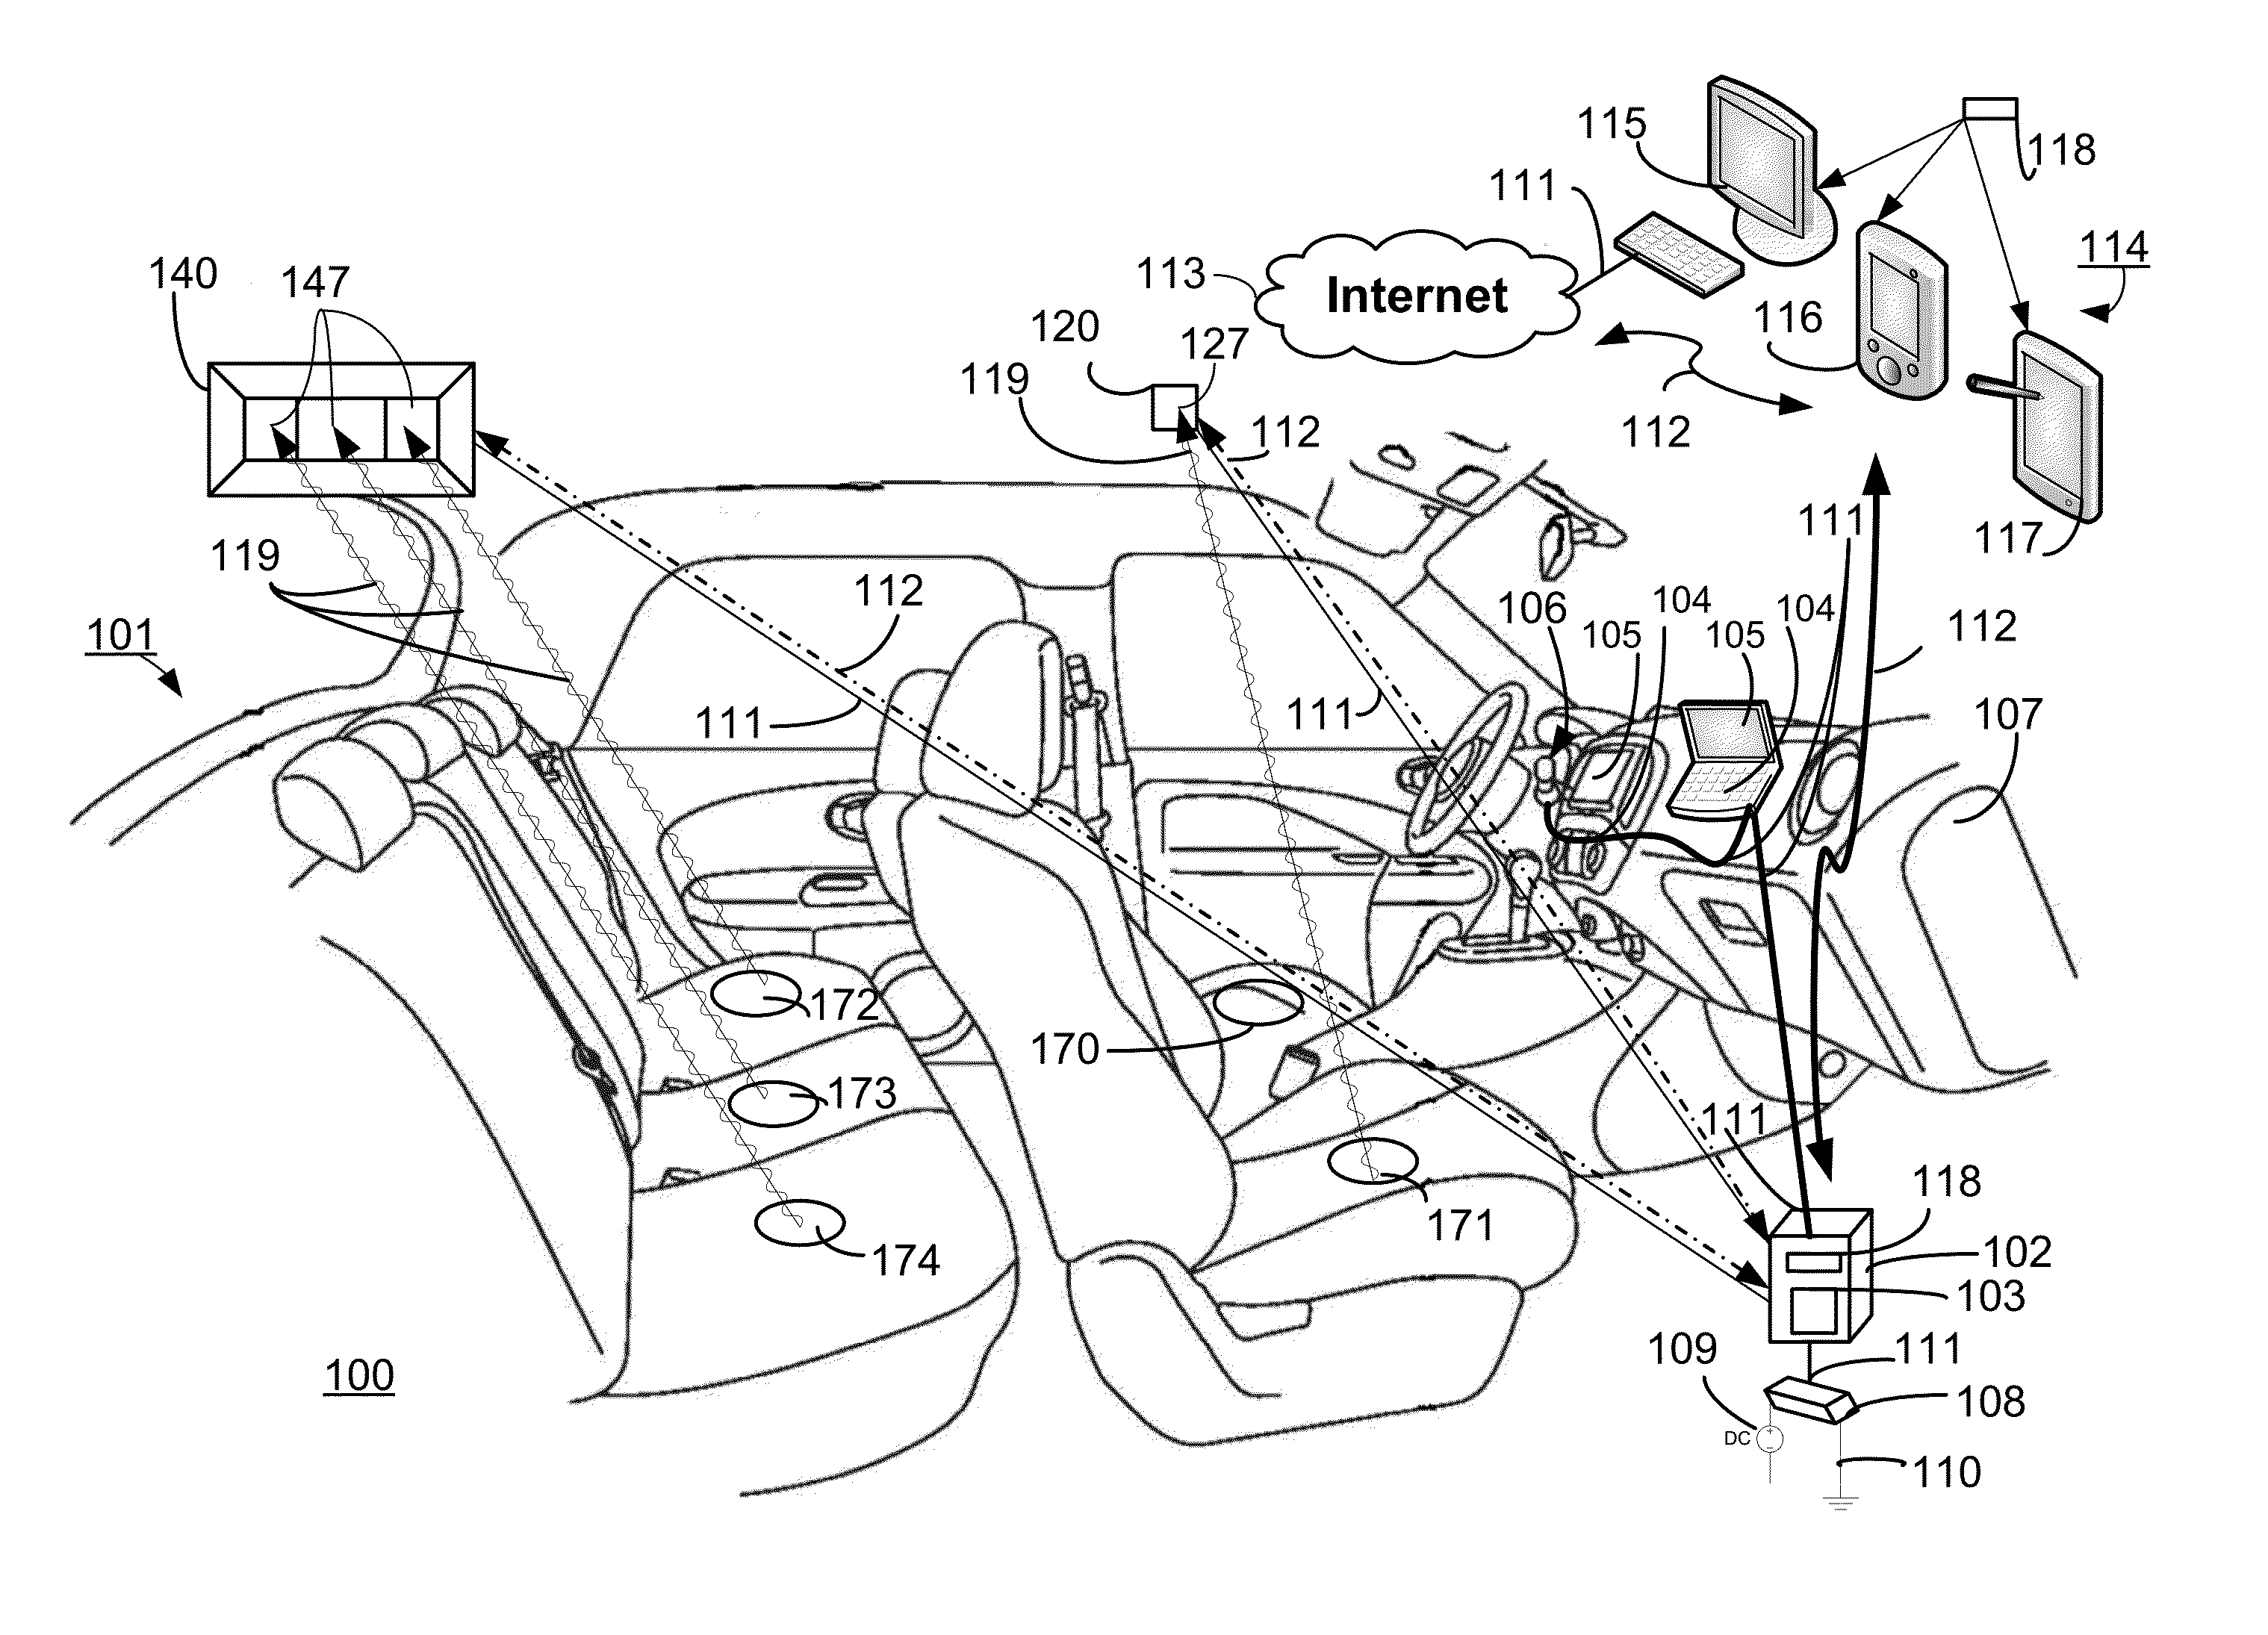 Compliance device, system and method for machine operation